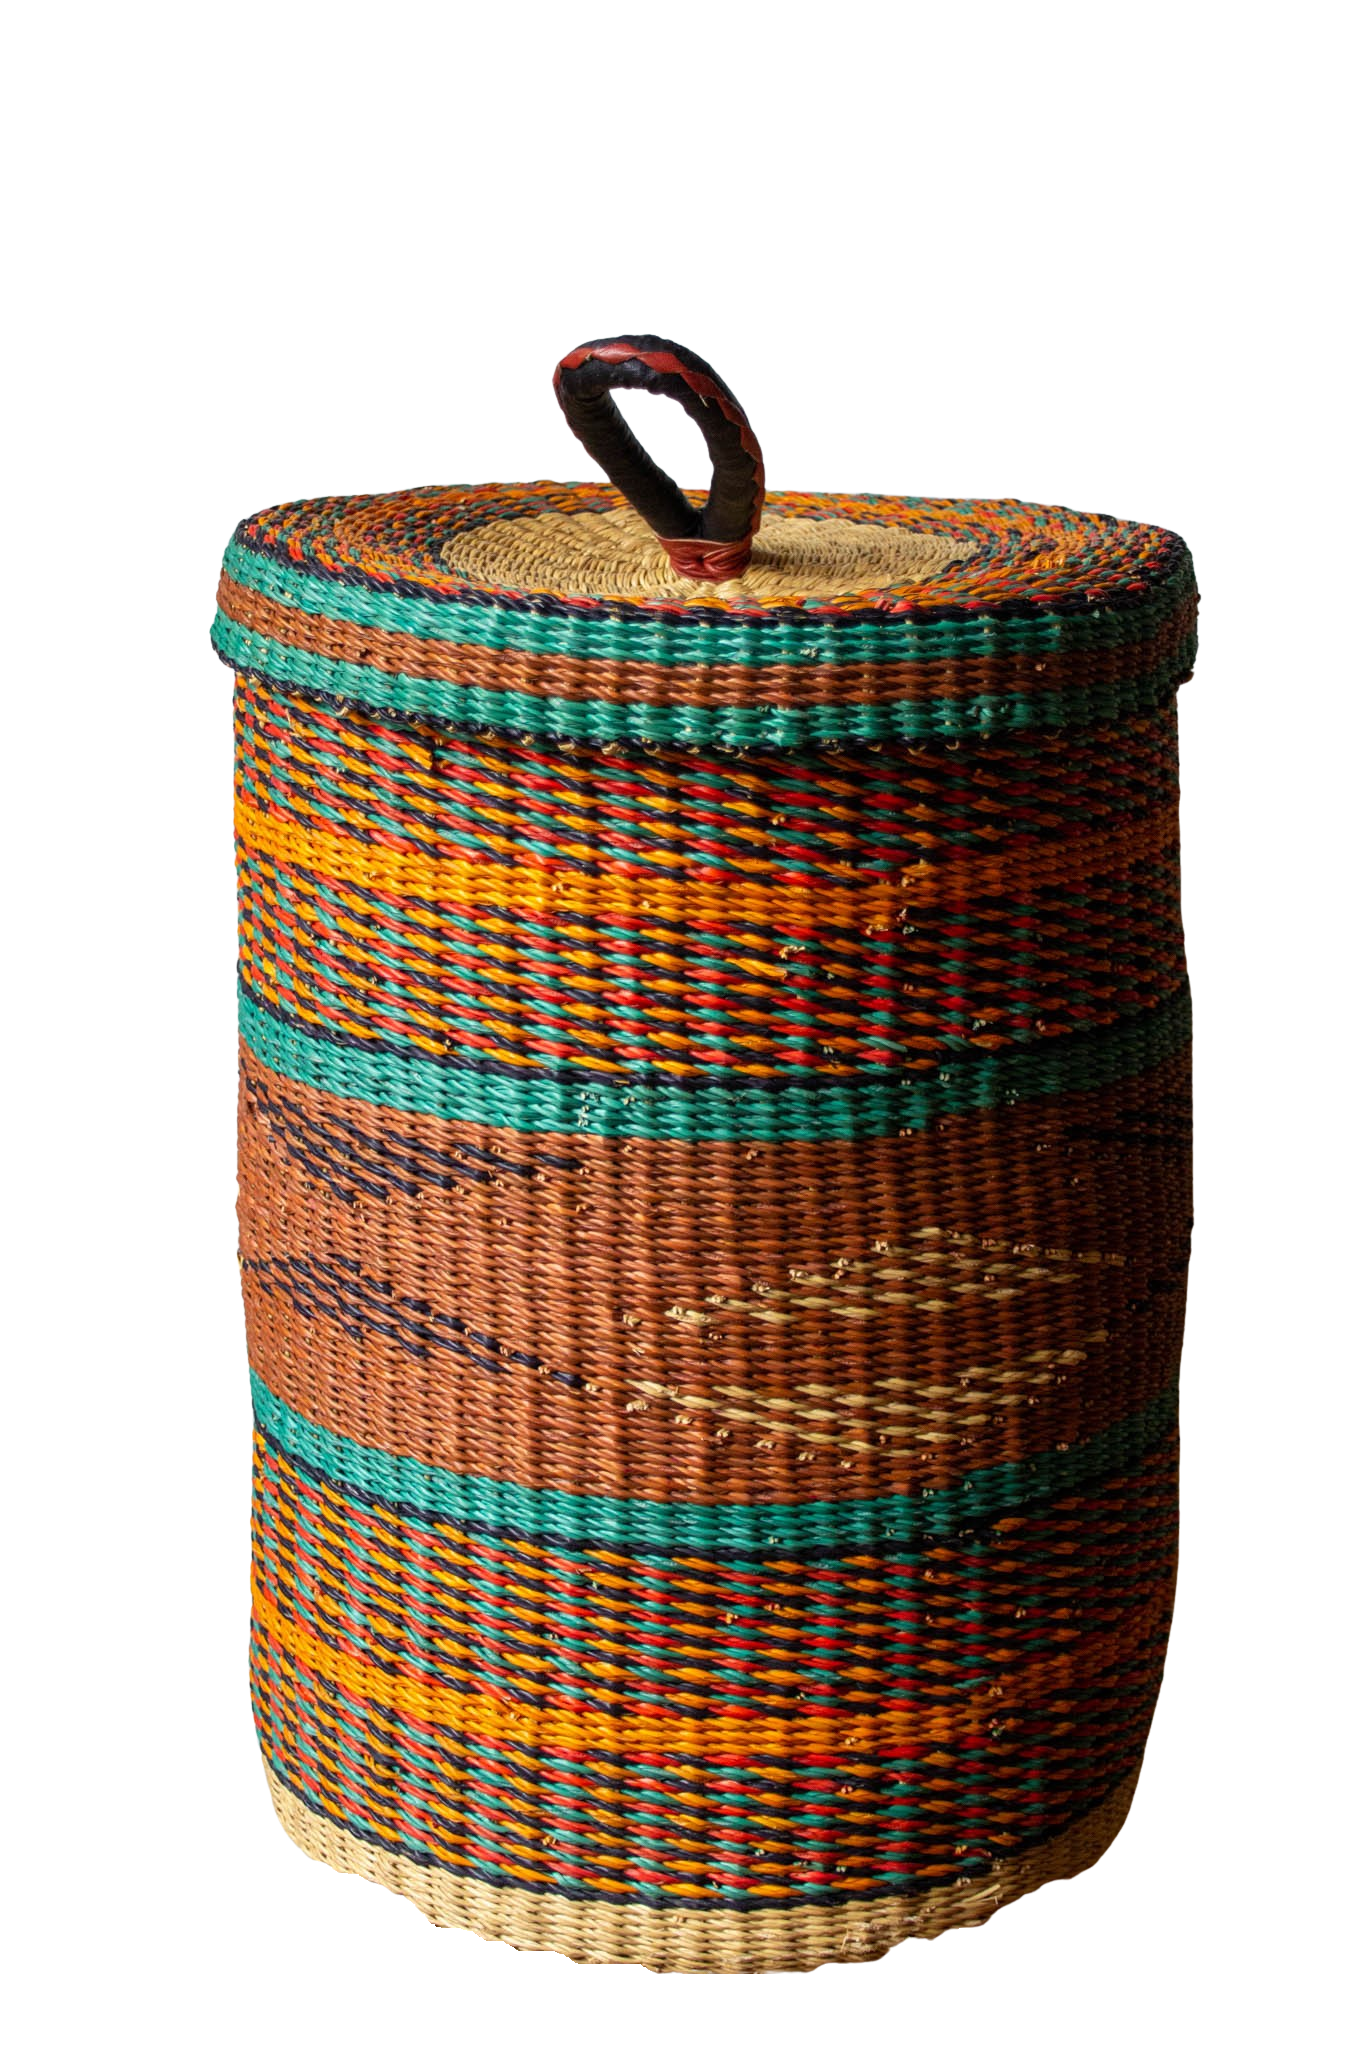 Brown and turquoise Laundry Basket with lid made of natural fiber 